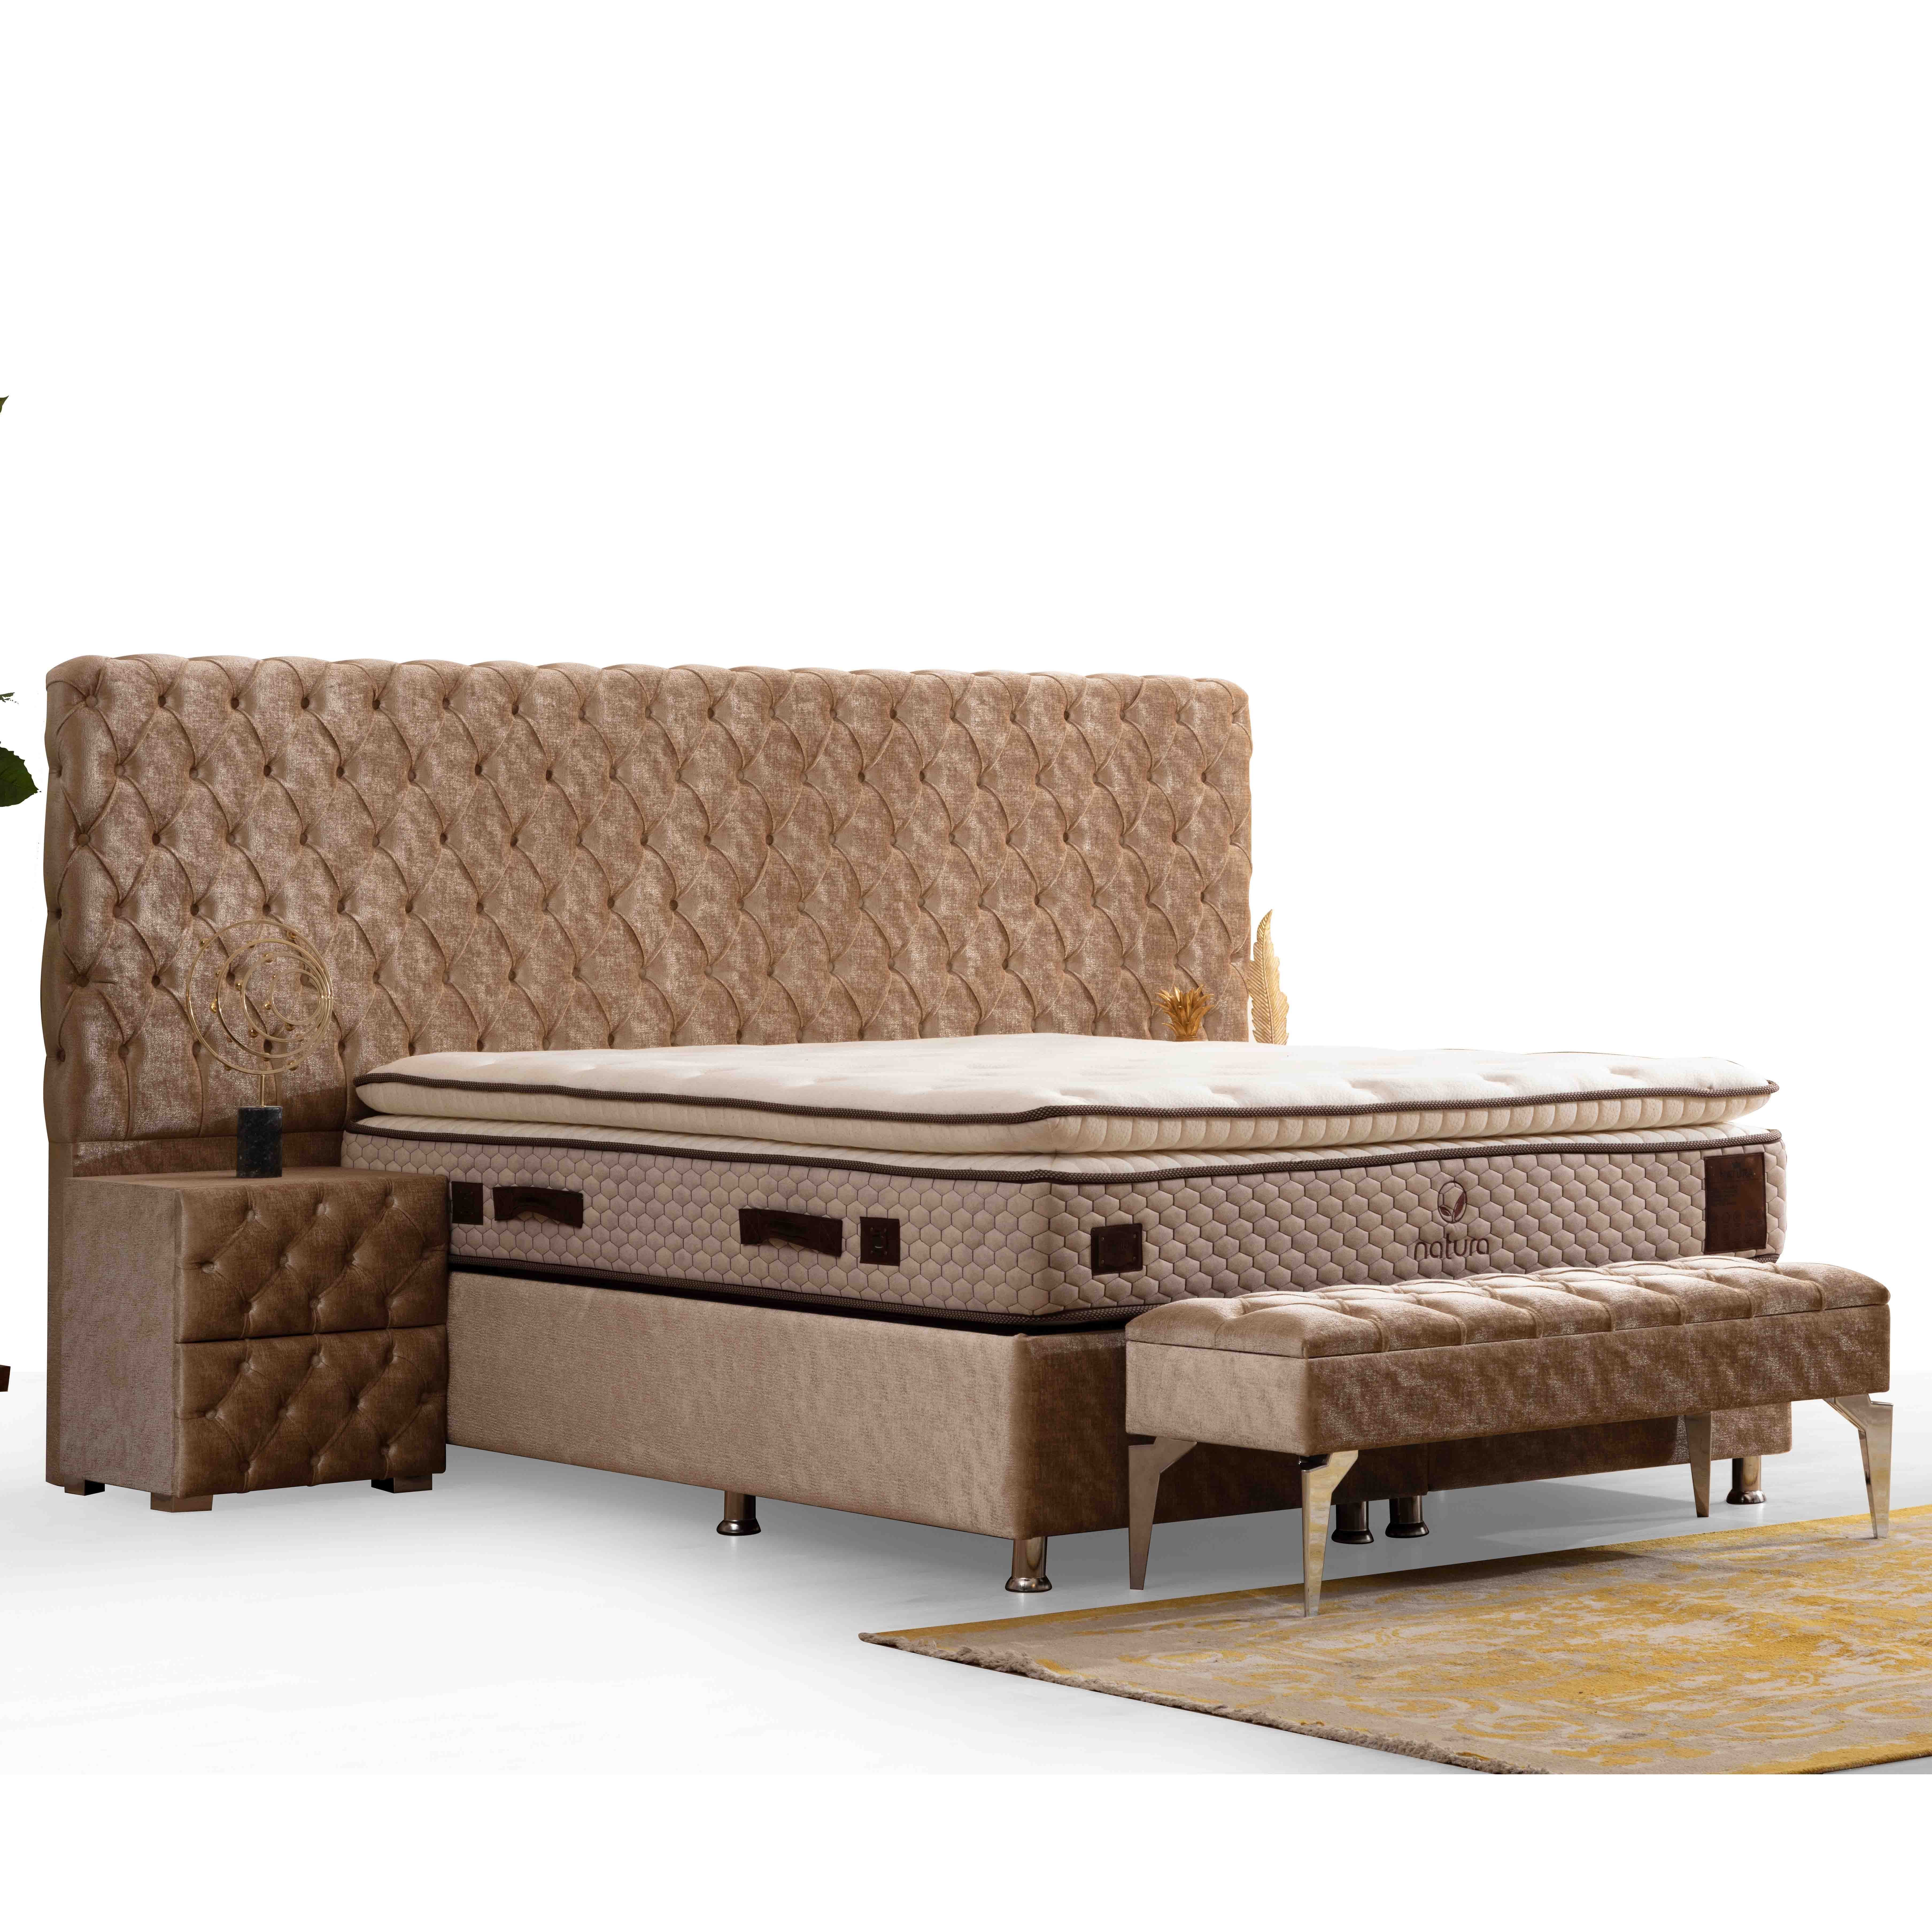 Siena Bed With Storage 180*200